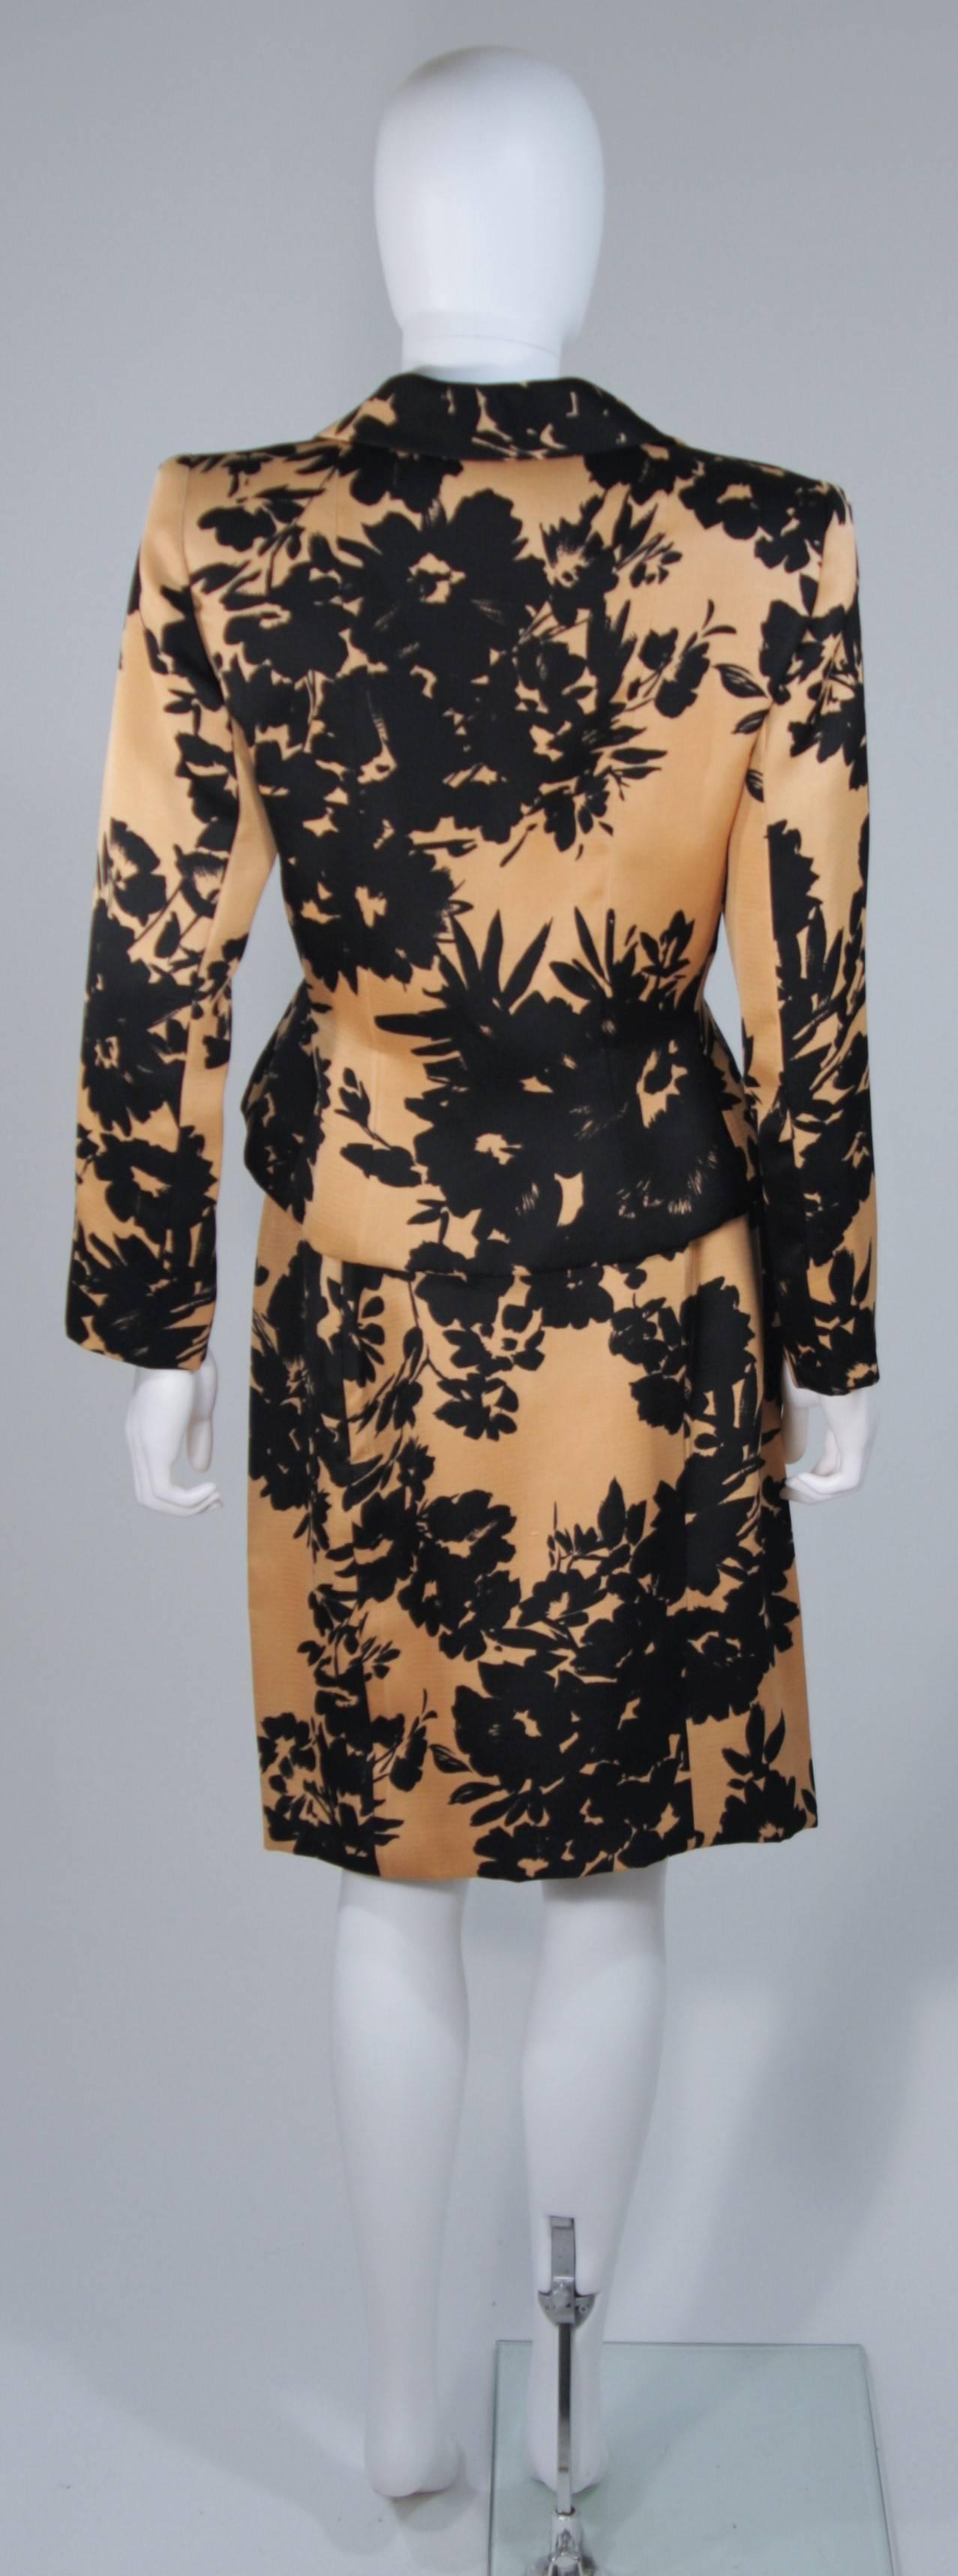 GIVENCHY Circa 1980s Apricot Brown and Black Floral Print Suit Size 6-8 2